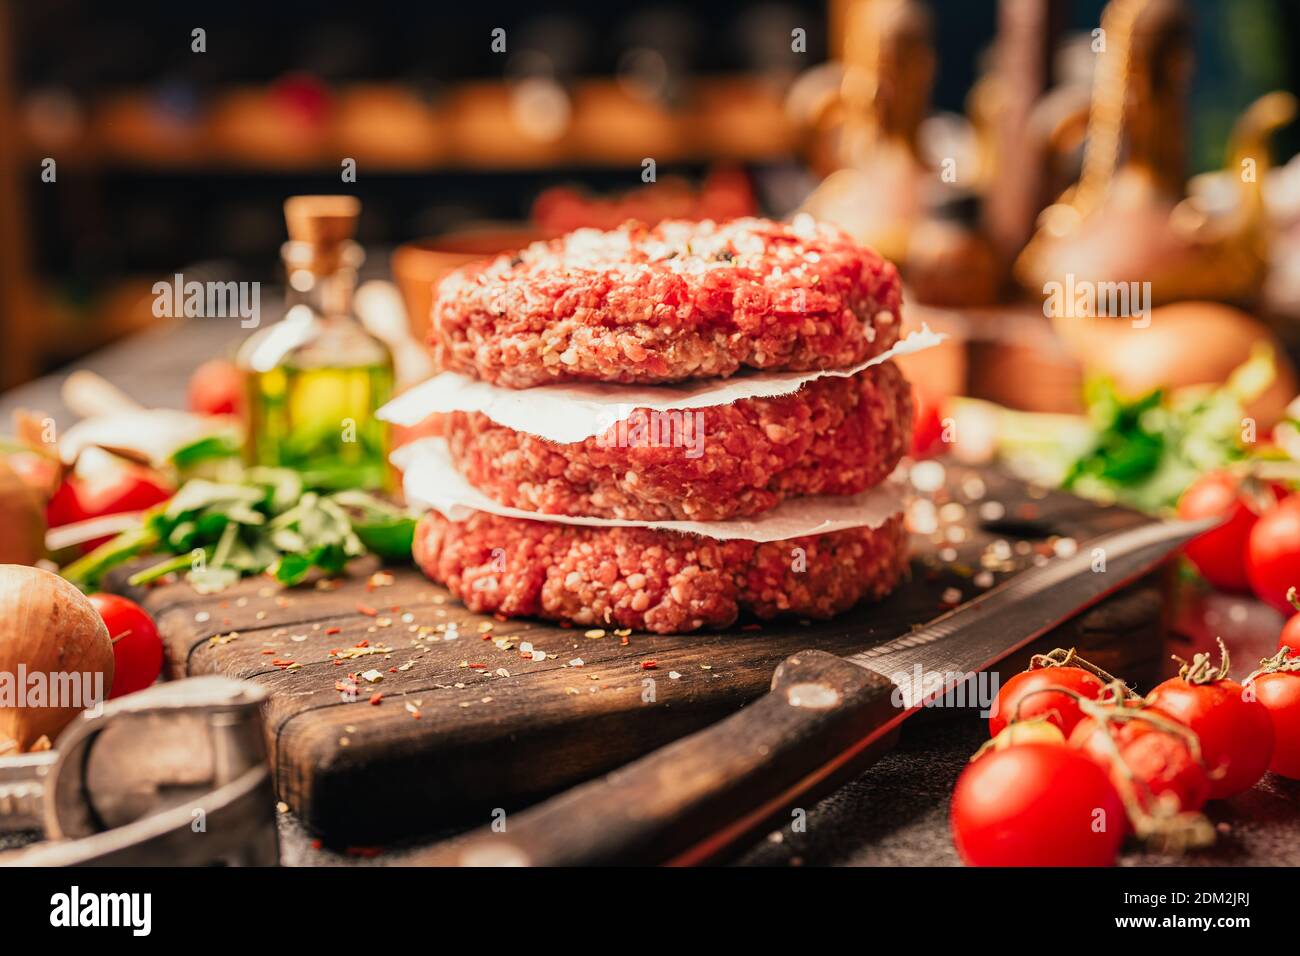 Round ground beef portioned beef patties made from beef mince prepared for on a platter.Hamburger meat seasoned and ready for a barbecue.Spices and co Stock Photo